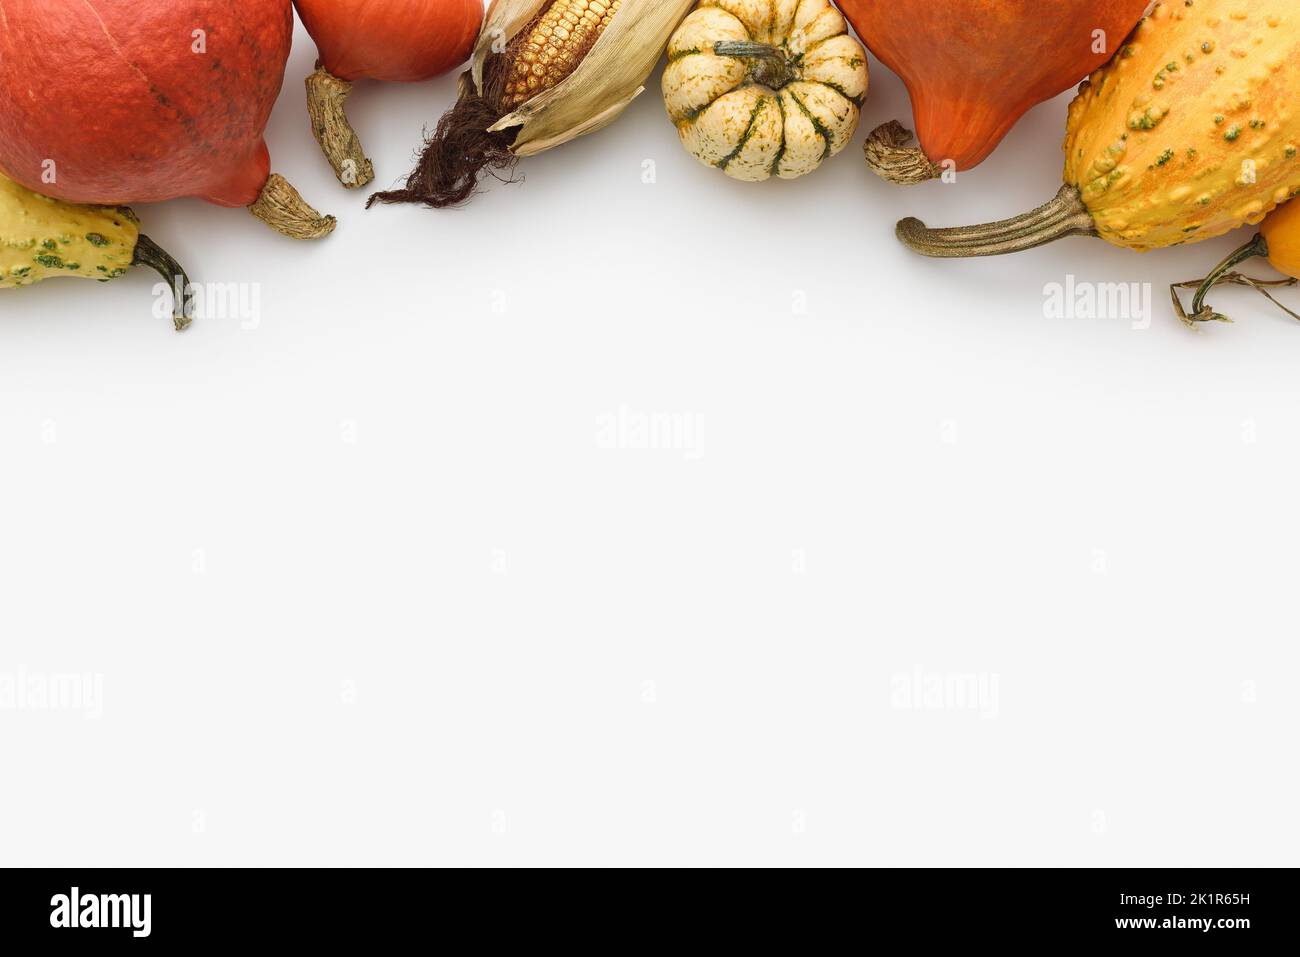 Autumn card with a border of pumpkins and decorative gourds on a white background with copy space for text Stock Photo